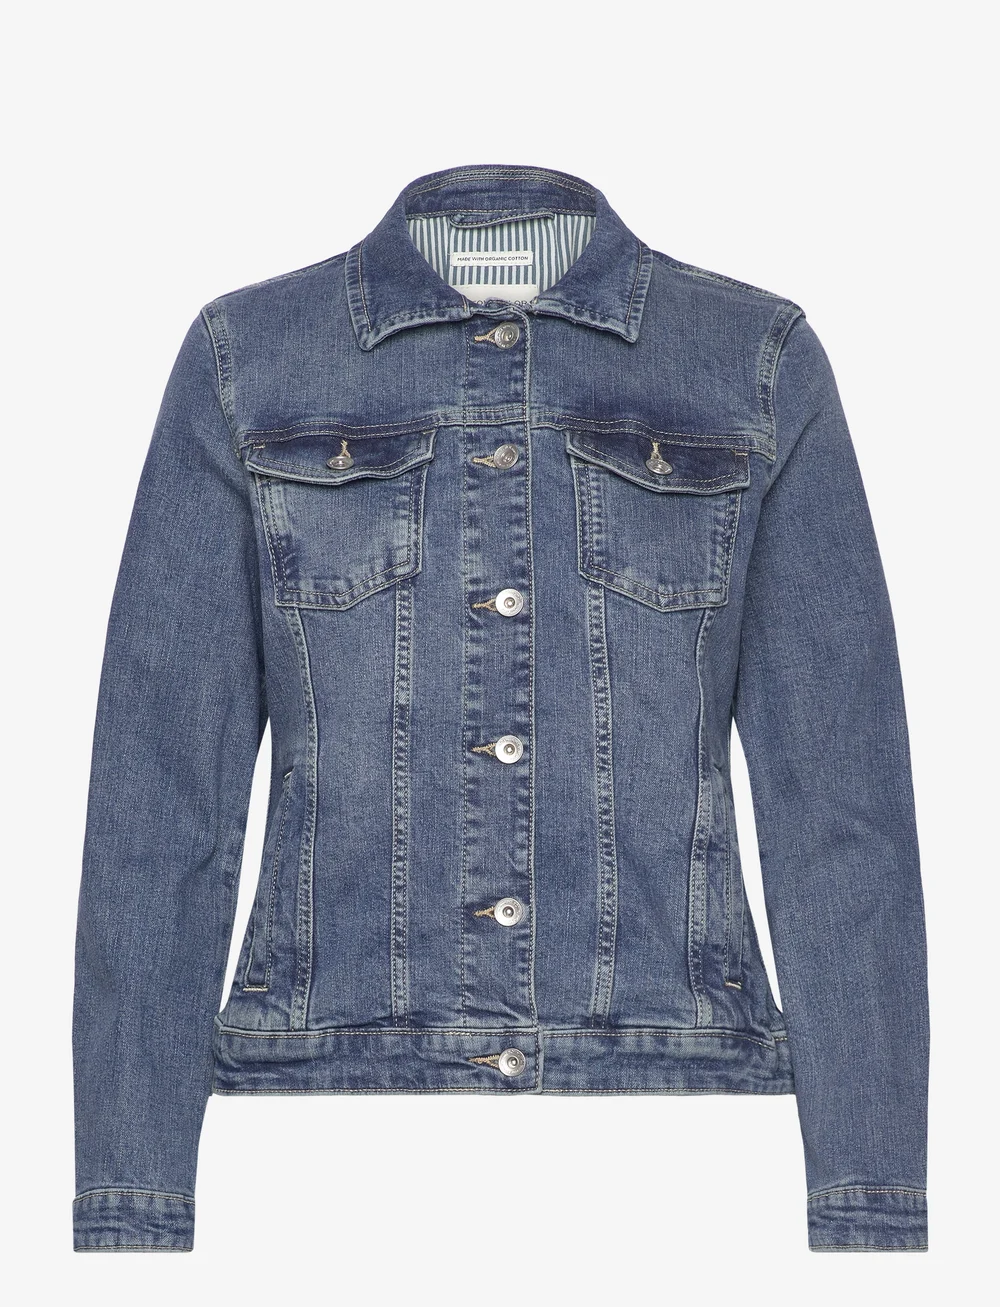 Tom Tailor Authentic Denim Jacket - 47.99 €. Buy Denim jackets from Tom  Tailor online at Boozt.com. Fast delivery and easy returns